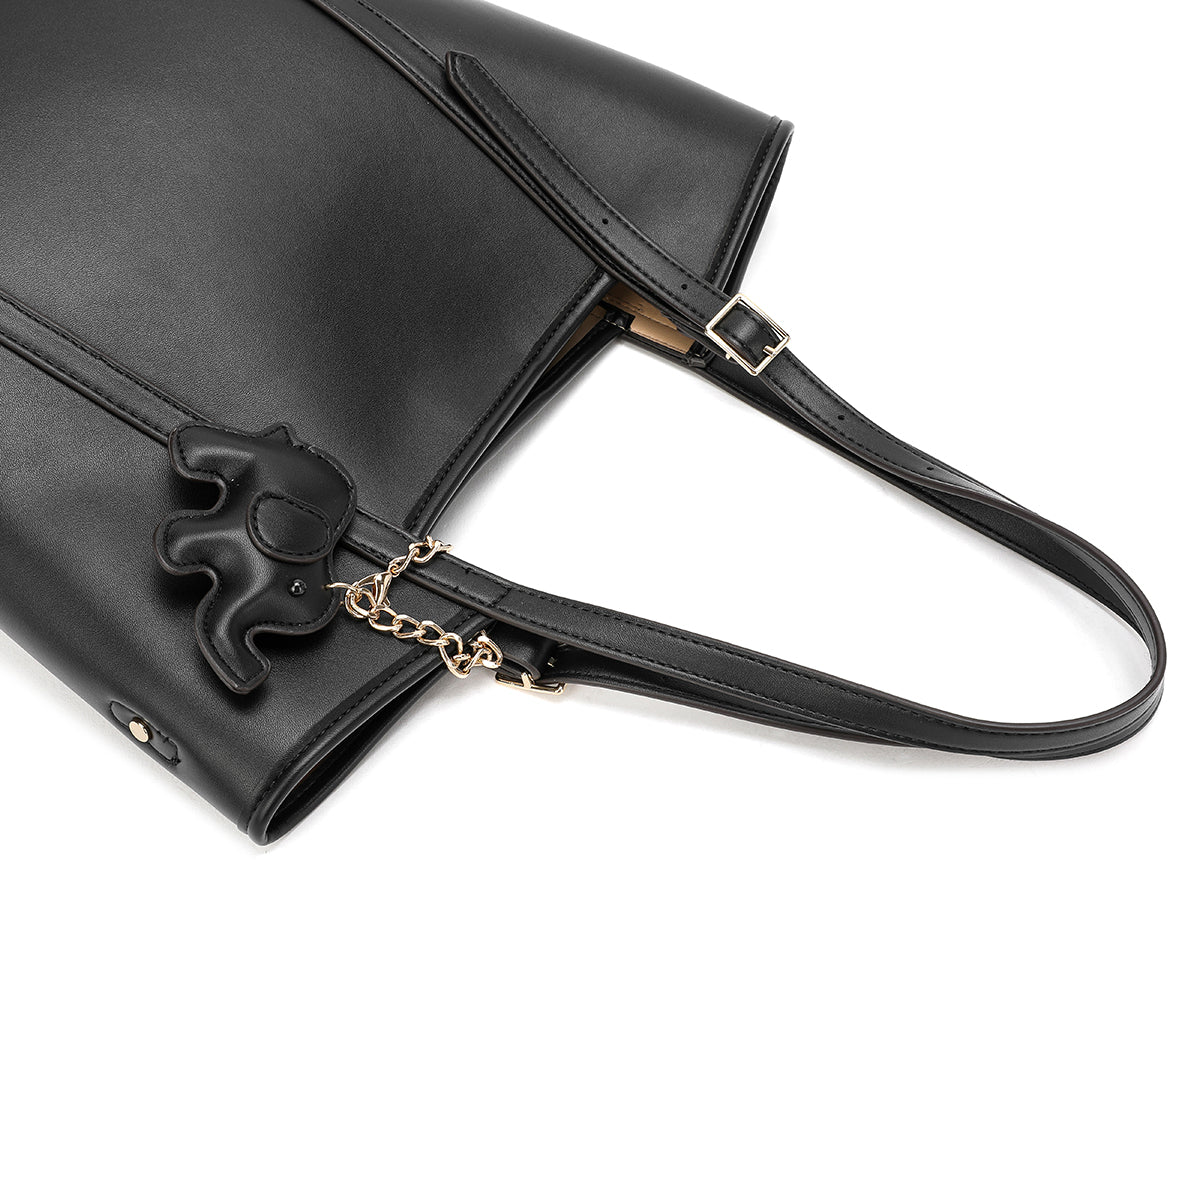 A spacious handbag with a distinctive classic design, available in two colors